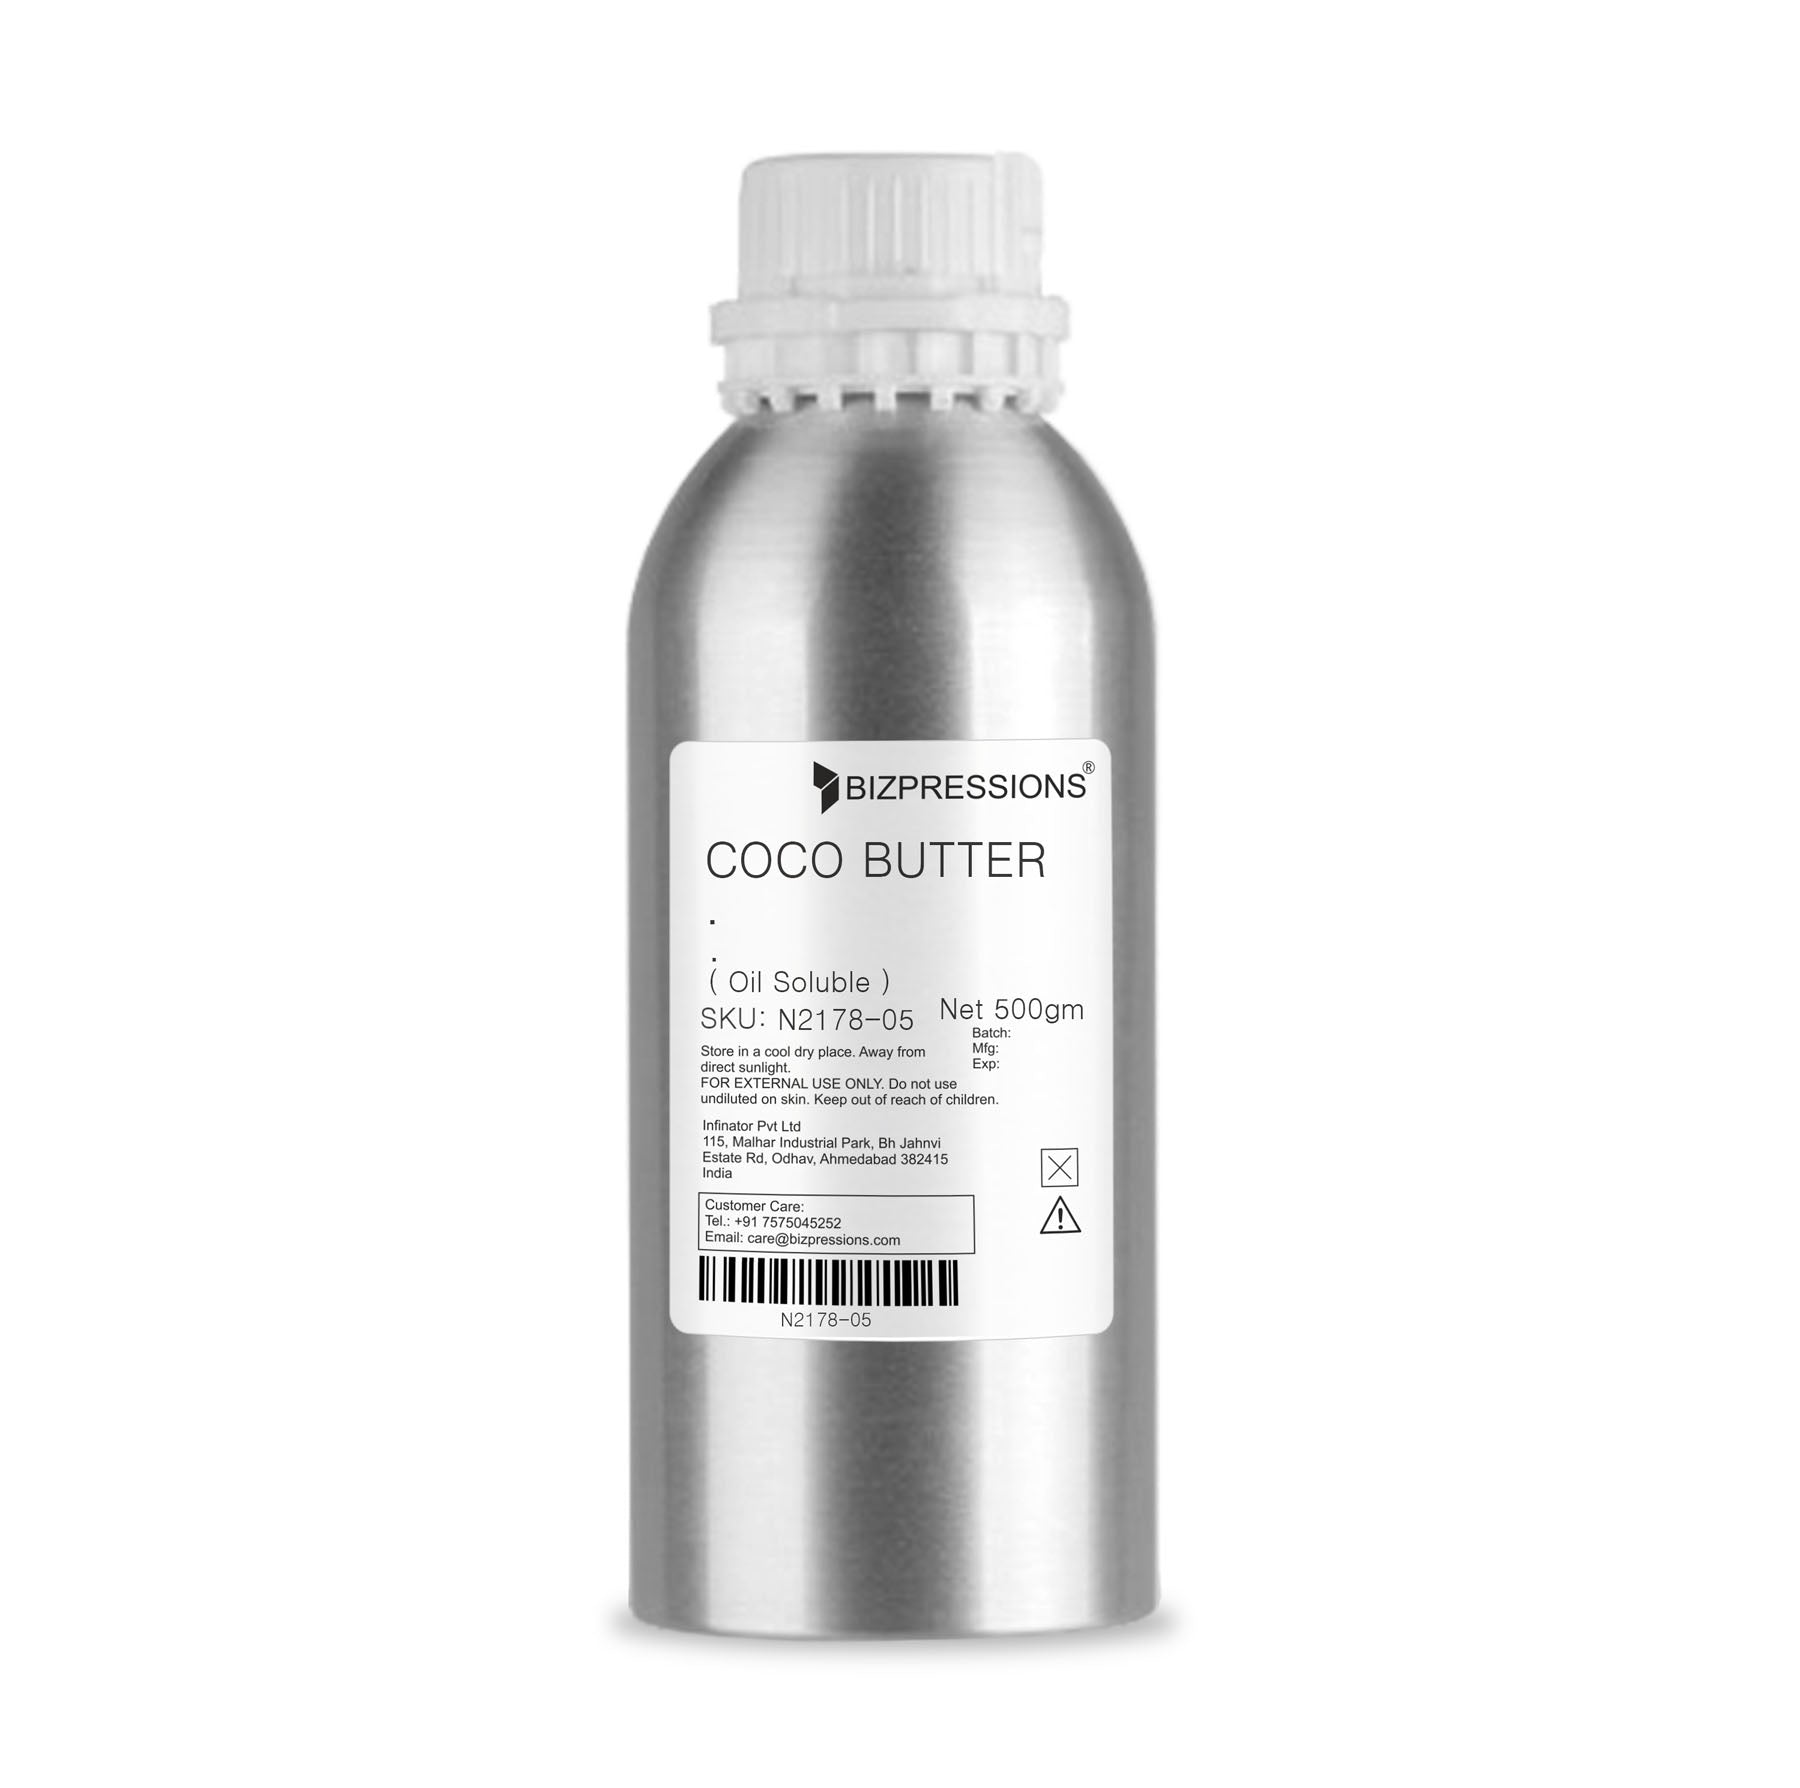 COCO BUTTER - Fragrance ( Oil Soluble ) - 500 gm